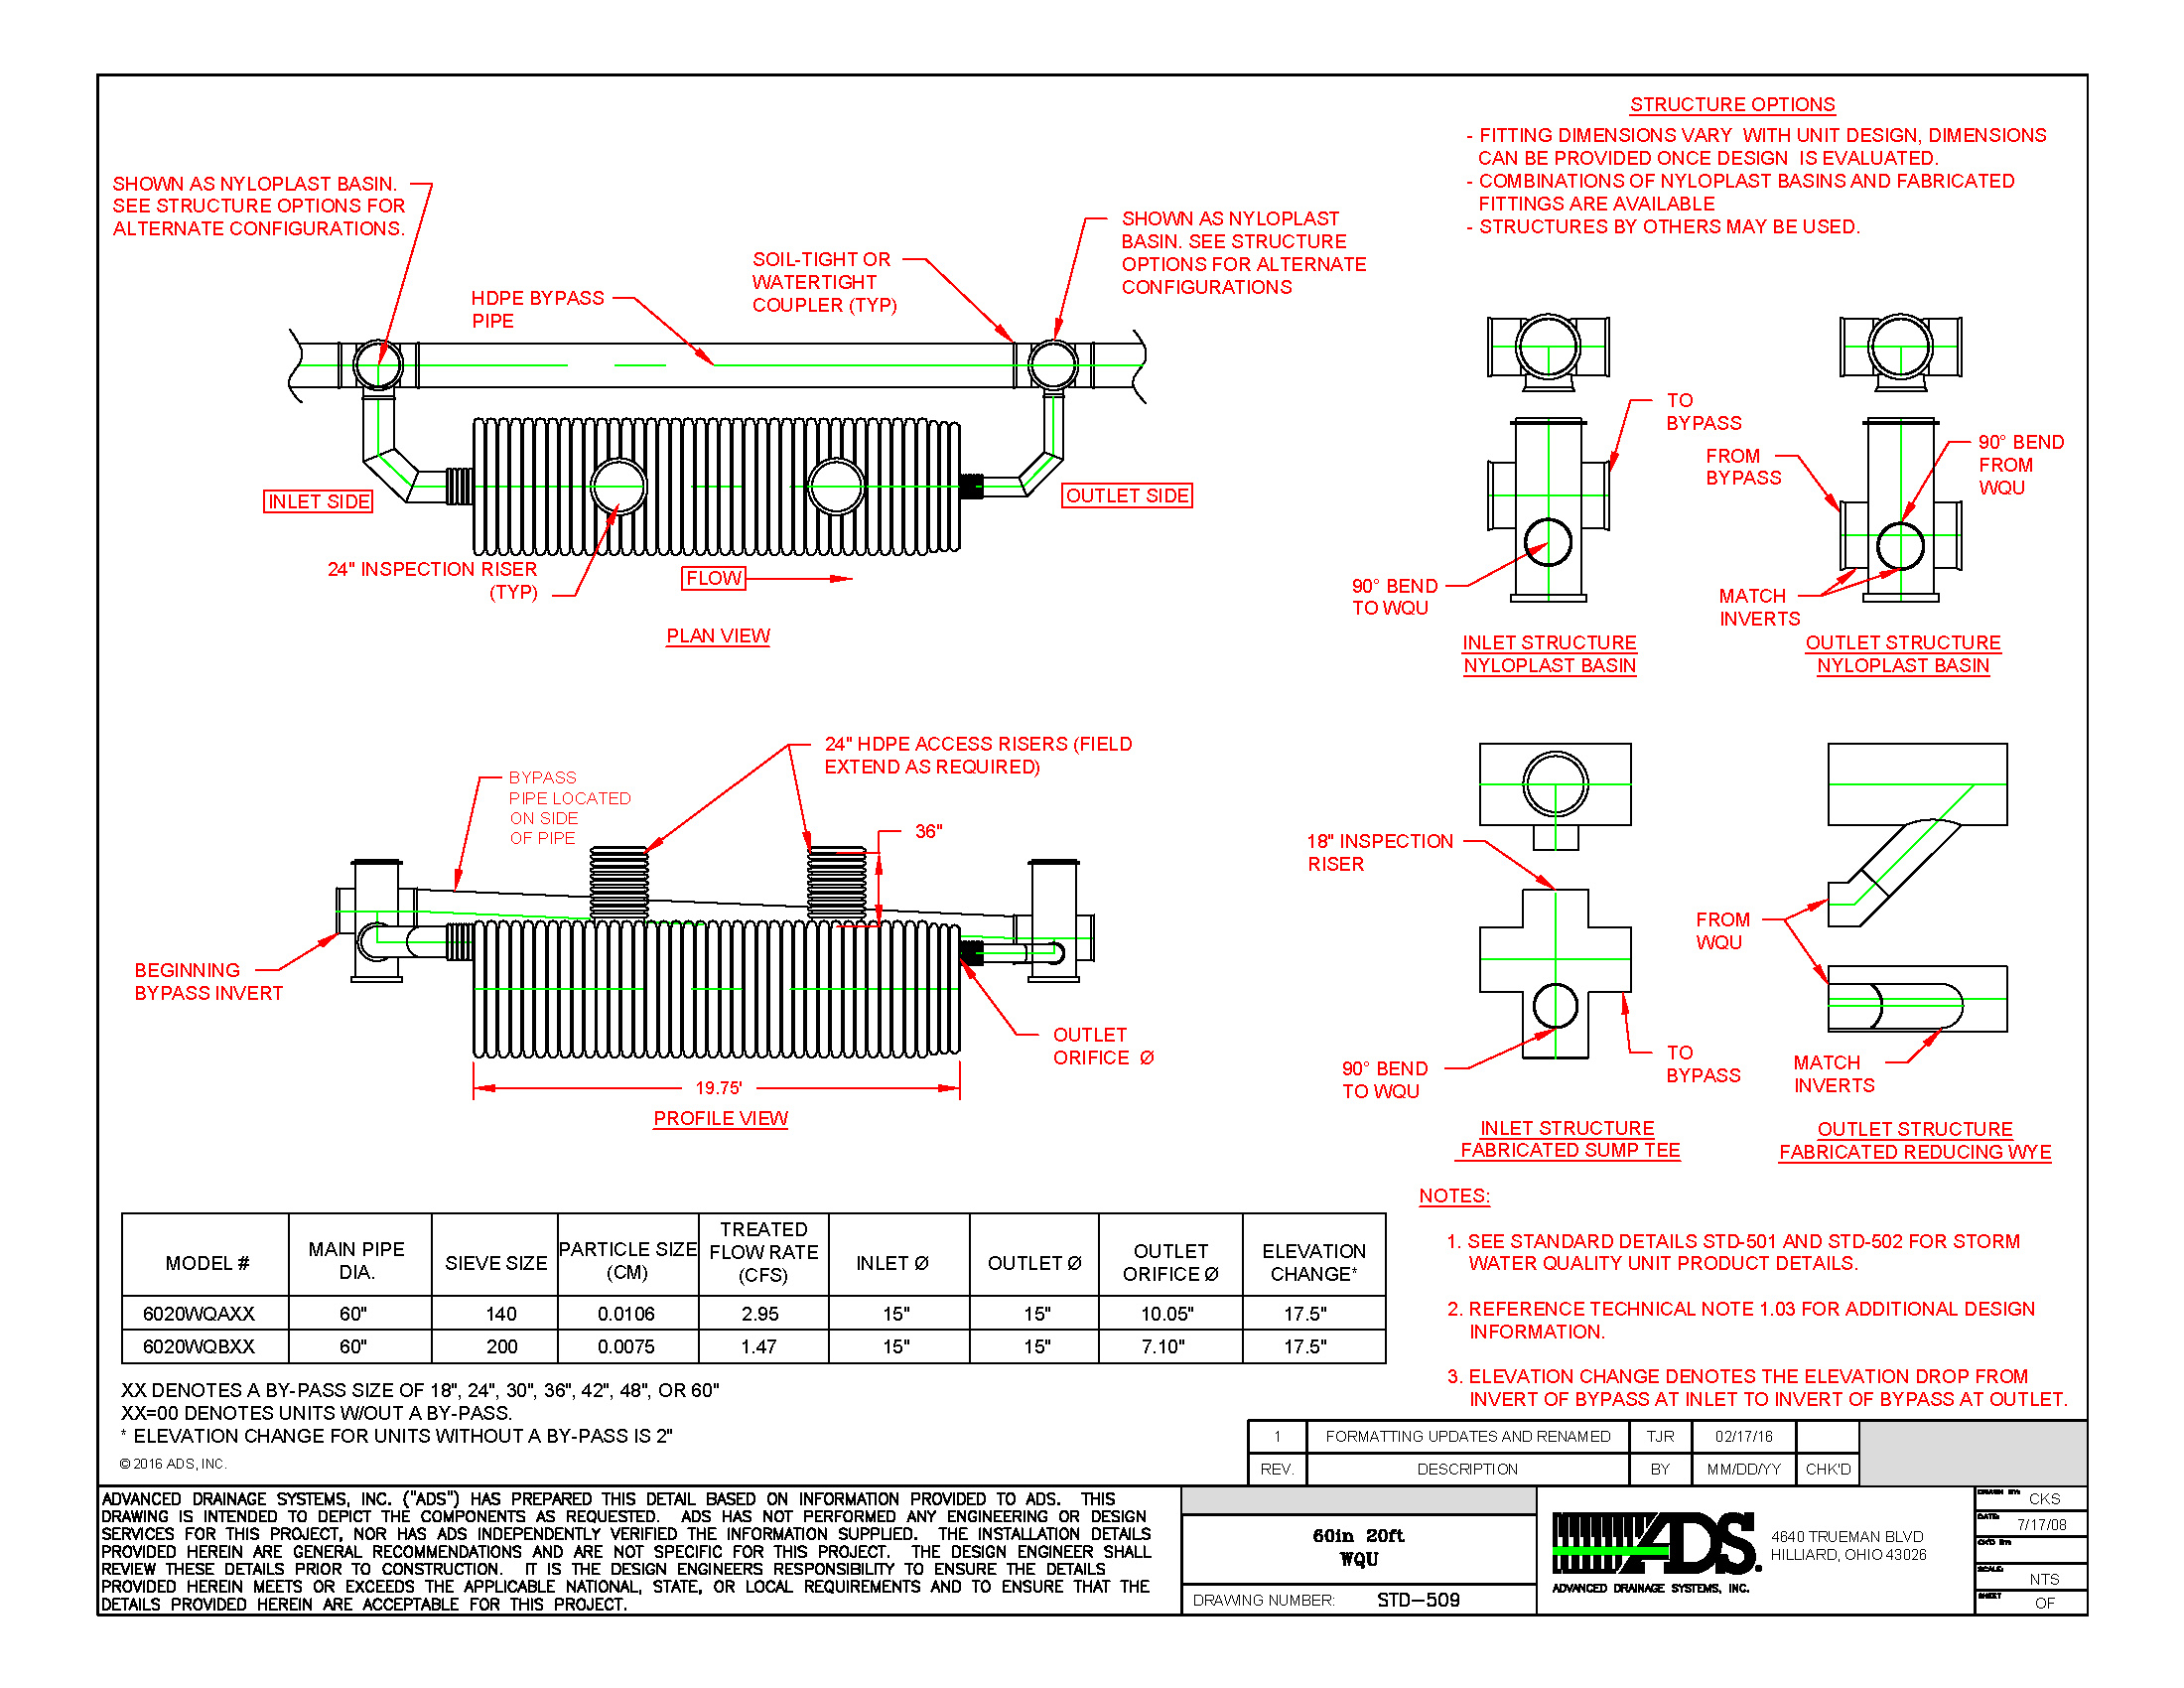 Pipe Support Design Manual